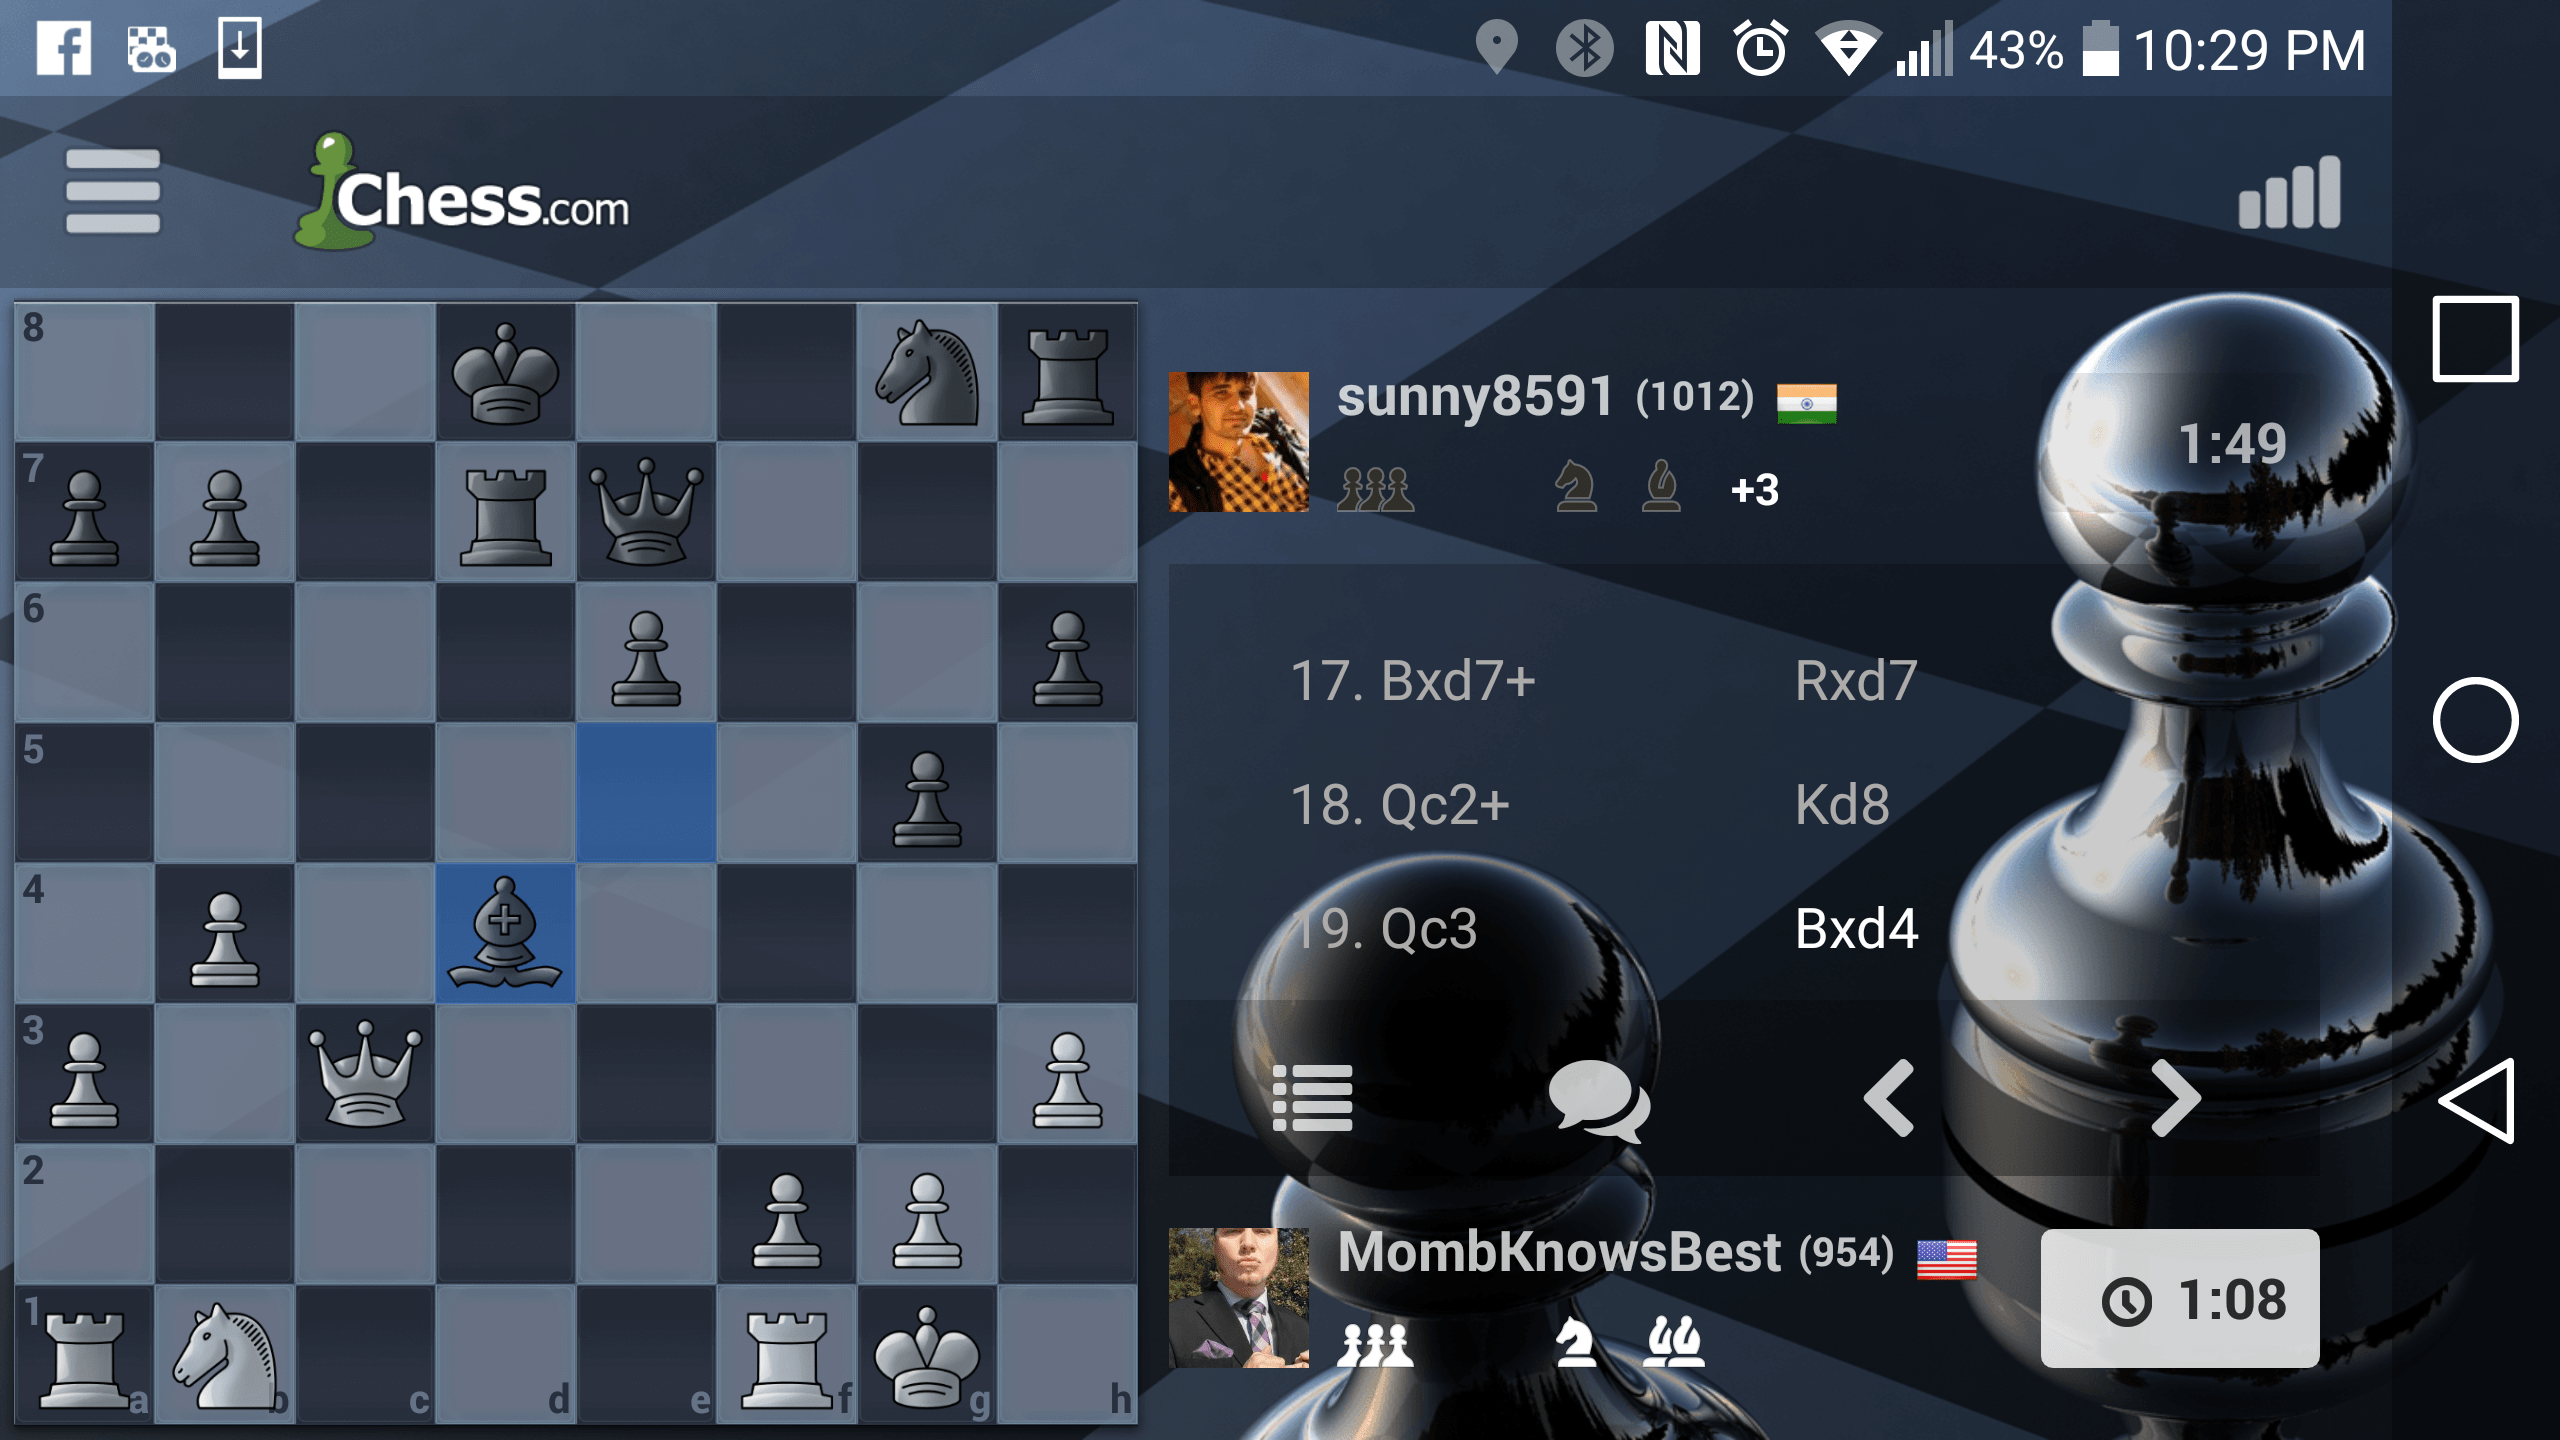 Android App has no way to login - Chess Forums 